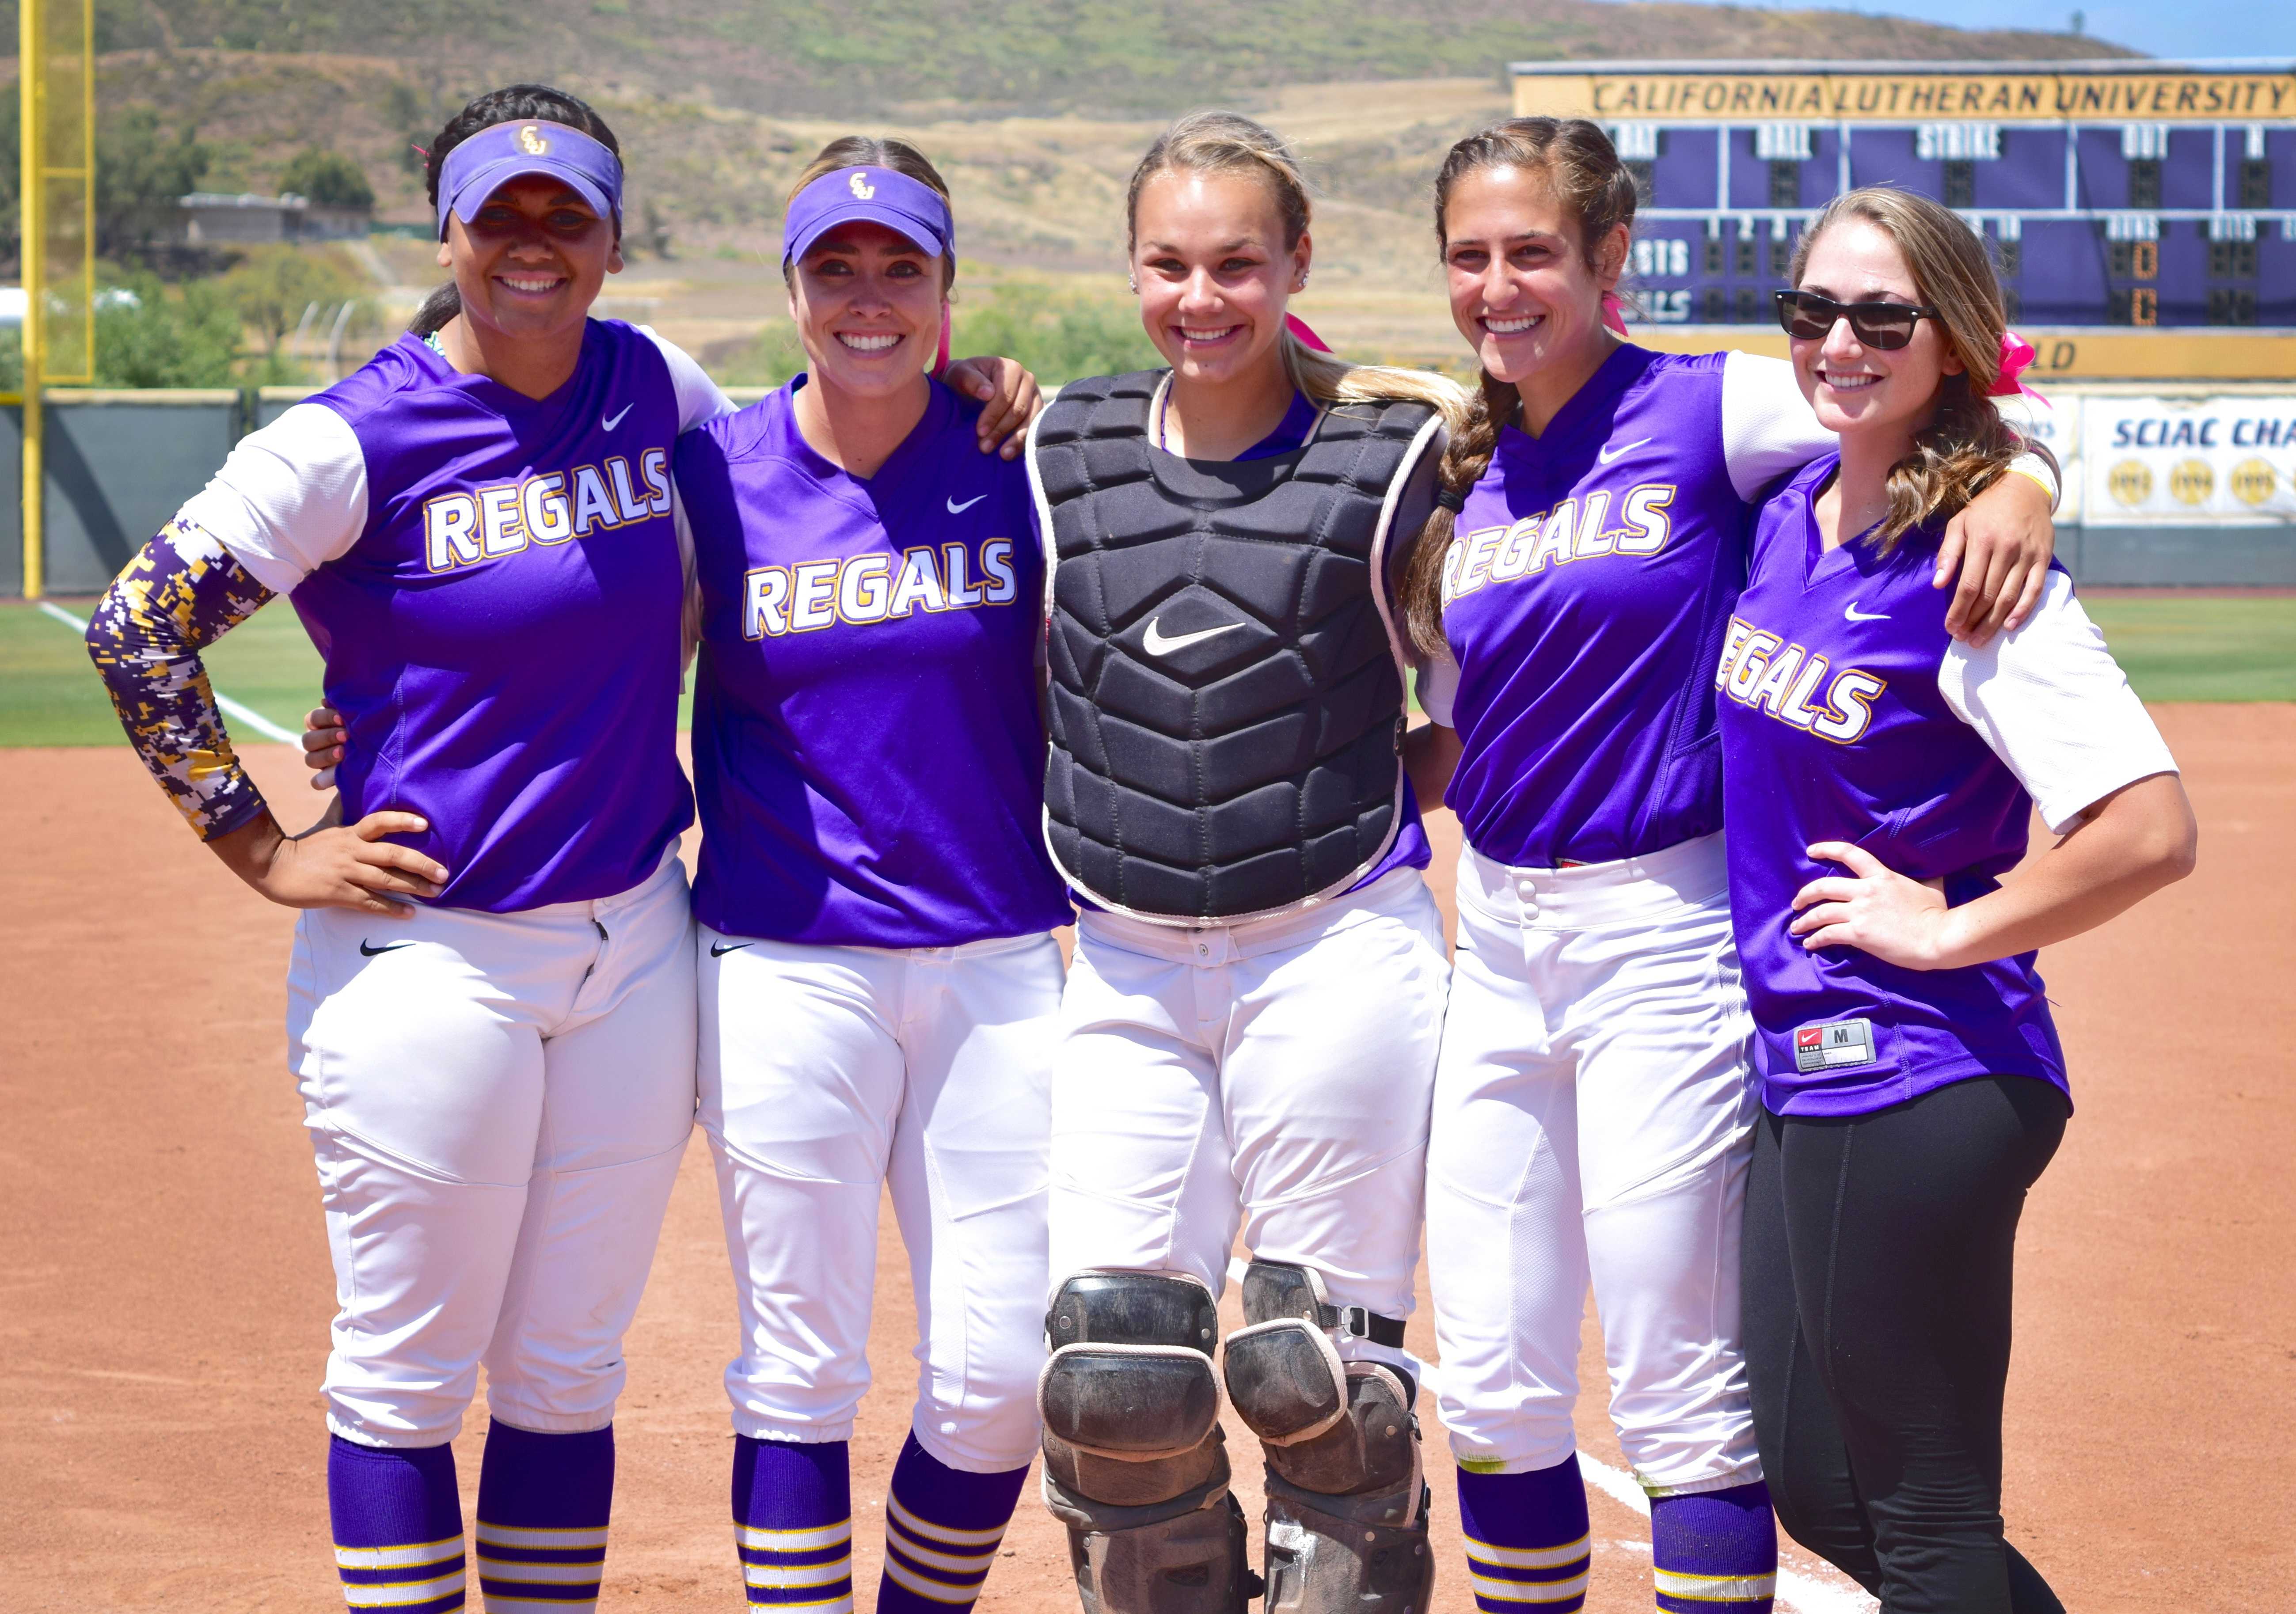  Seniors Blake Lewis, Andrea Brackpool, Taylor Beacham, Hannah Brown and Brittney Reed were honored after the double-header this past Friday. Photo by Roman Valenzuela - Staff Photographer